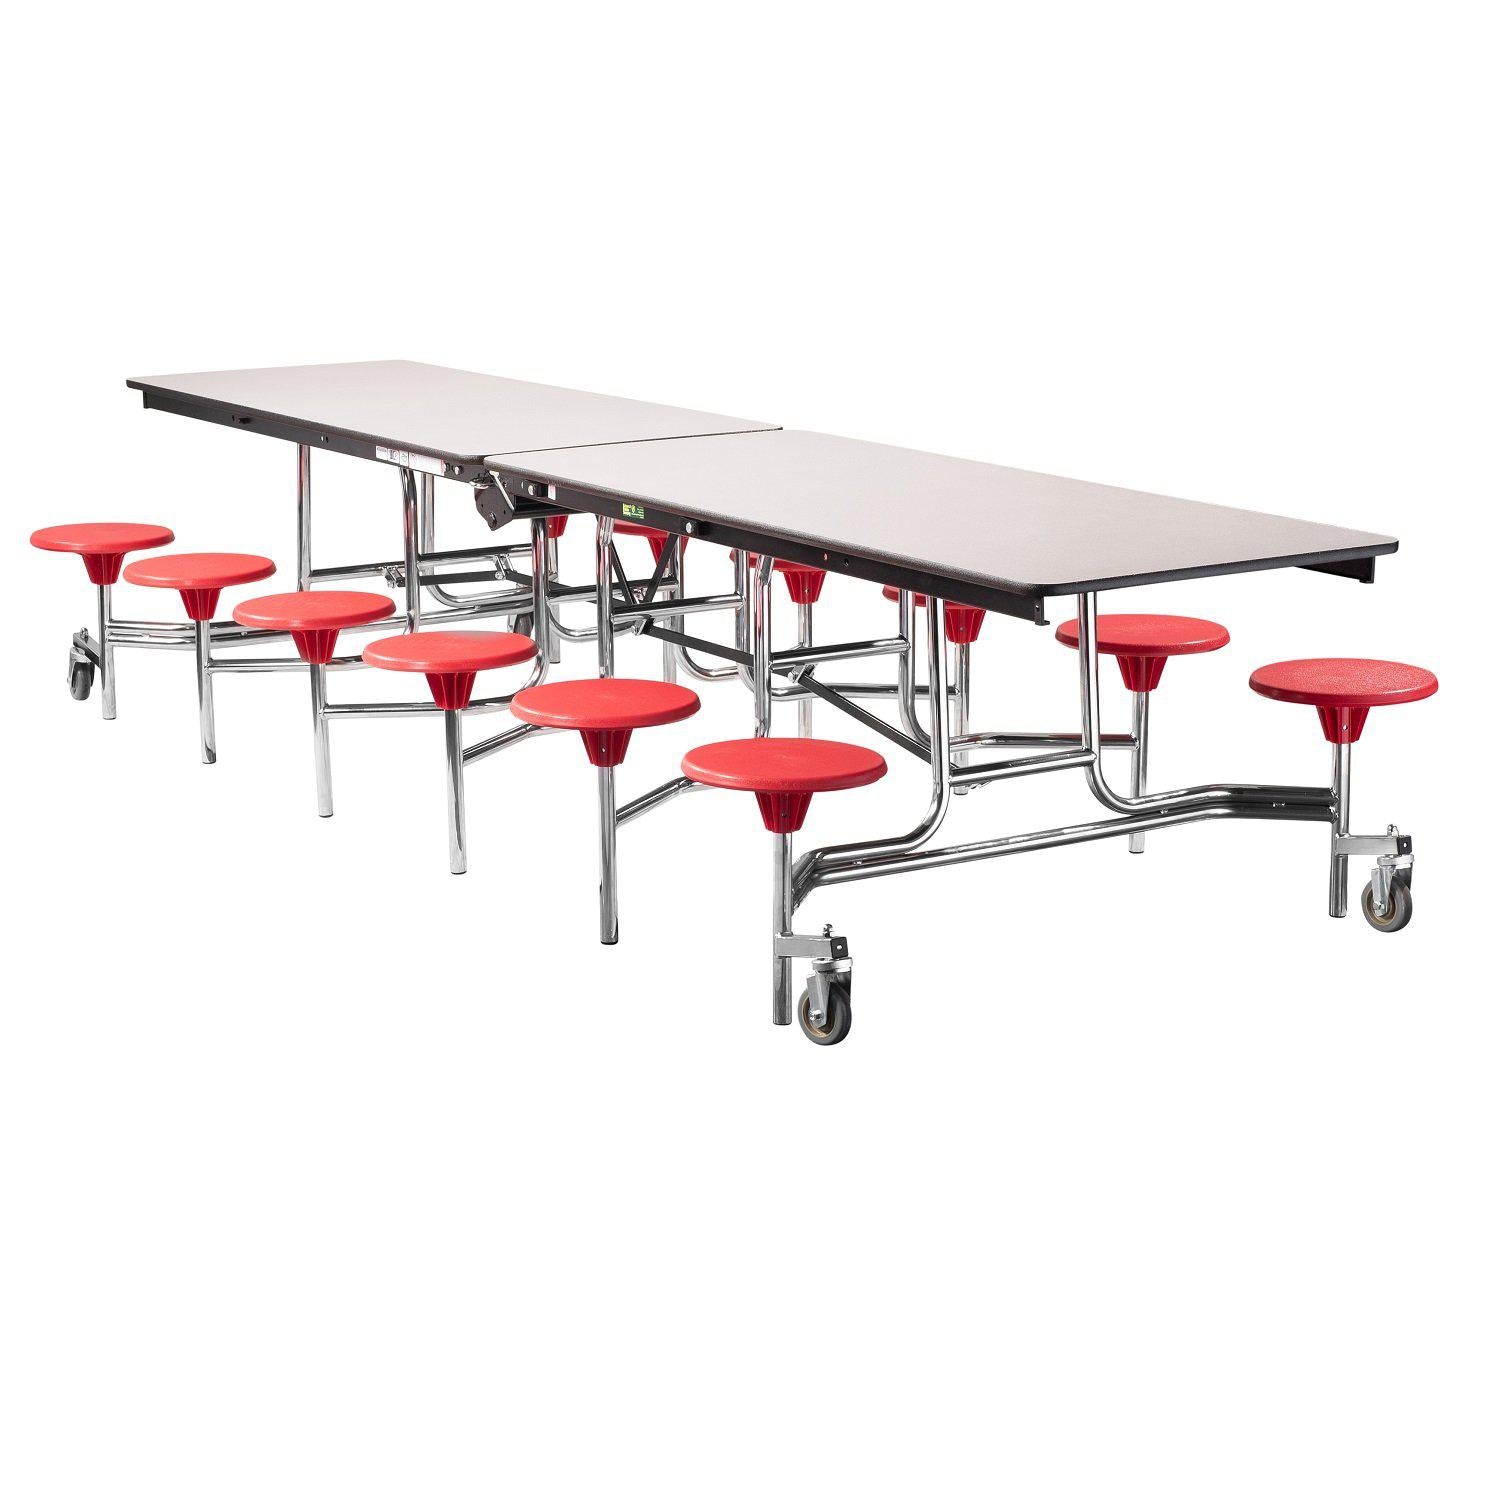 Mobile Cafeteria Table with 12 Stools, 12'L Rectangular, MDF Core, Black ProtectEdge, Chrome Frame